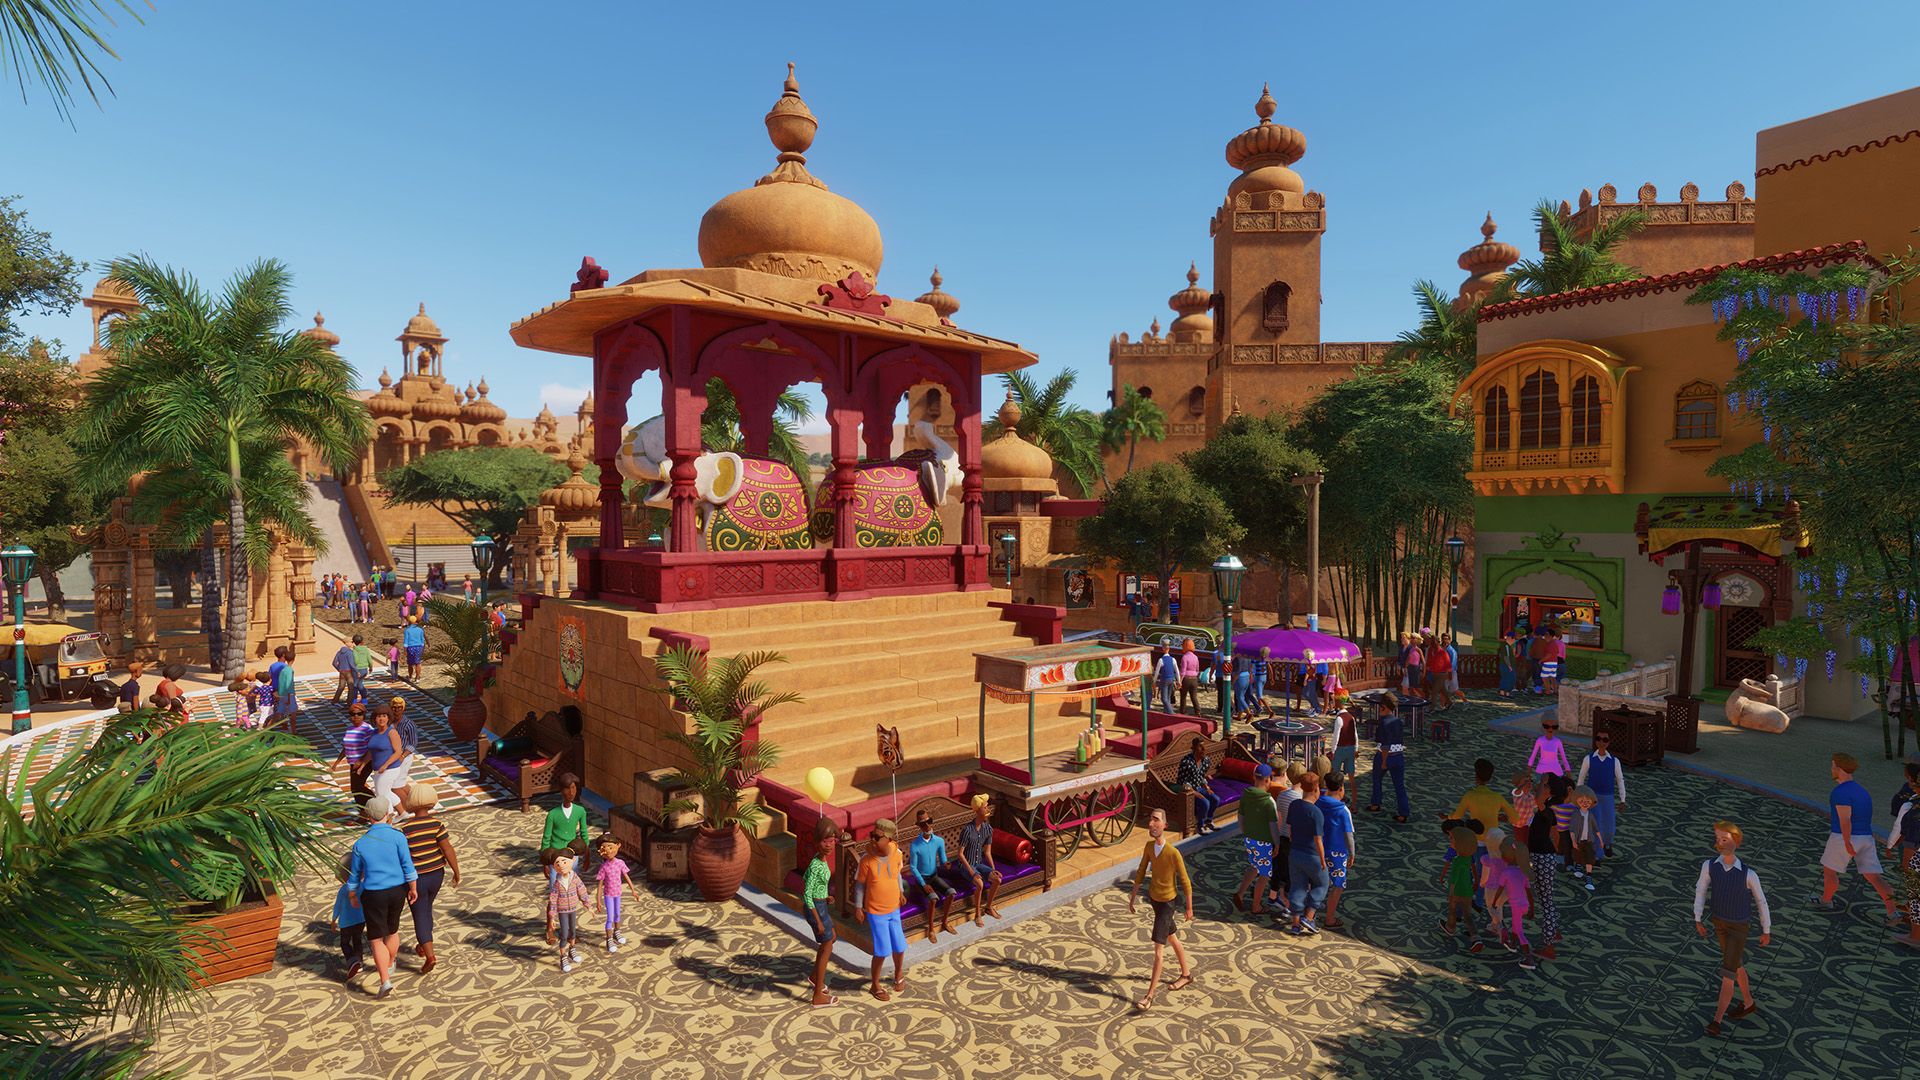 A park in Planet Zoo, showing Indian archetecture  and guest facilities